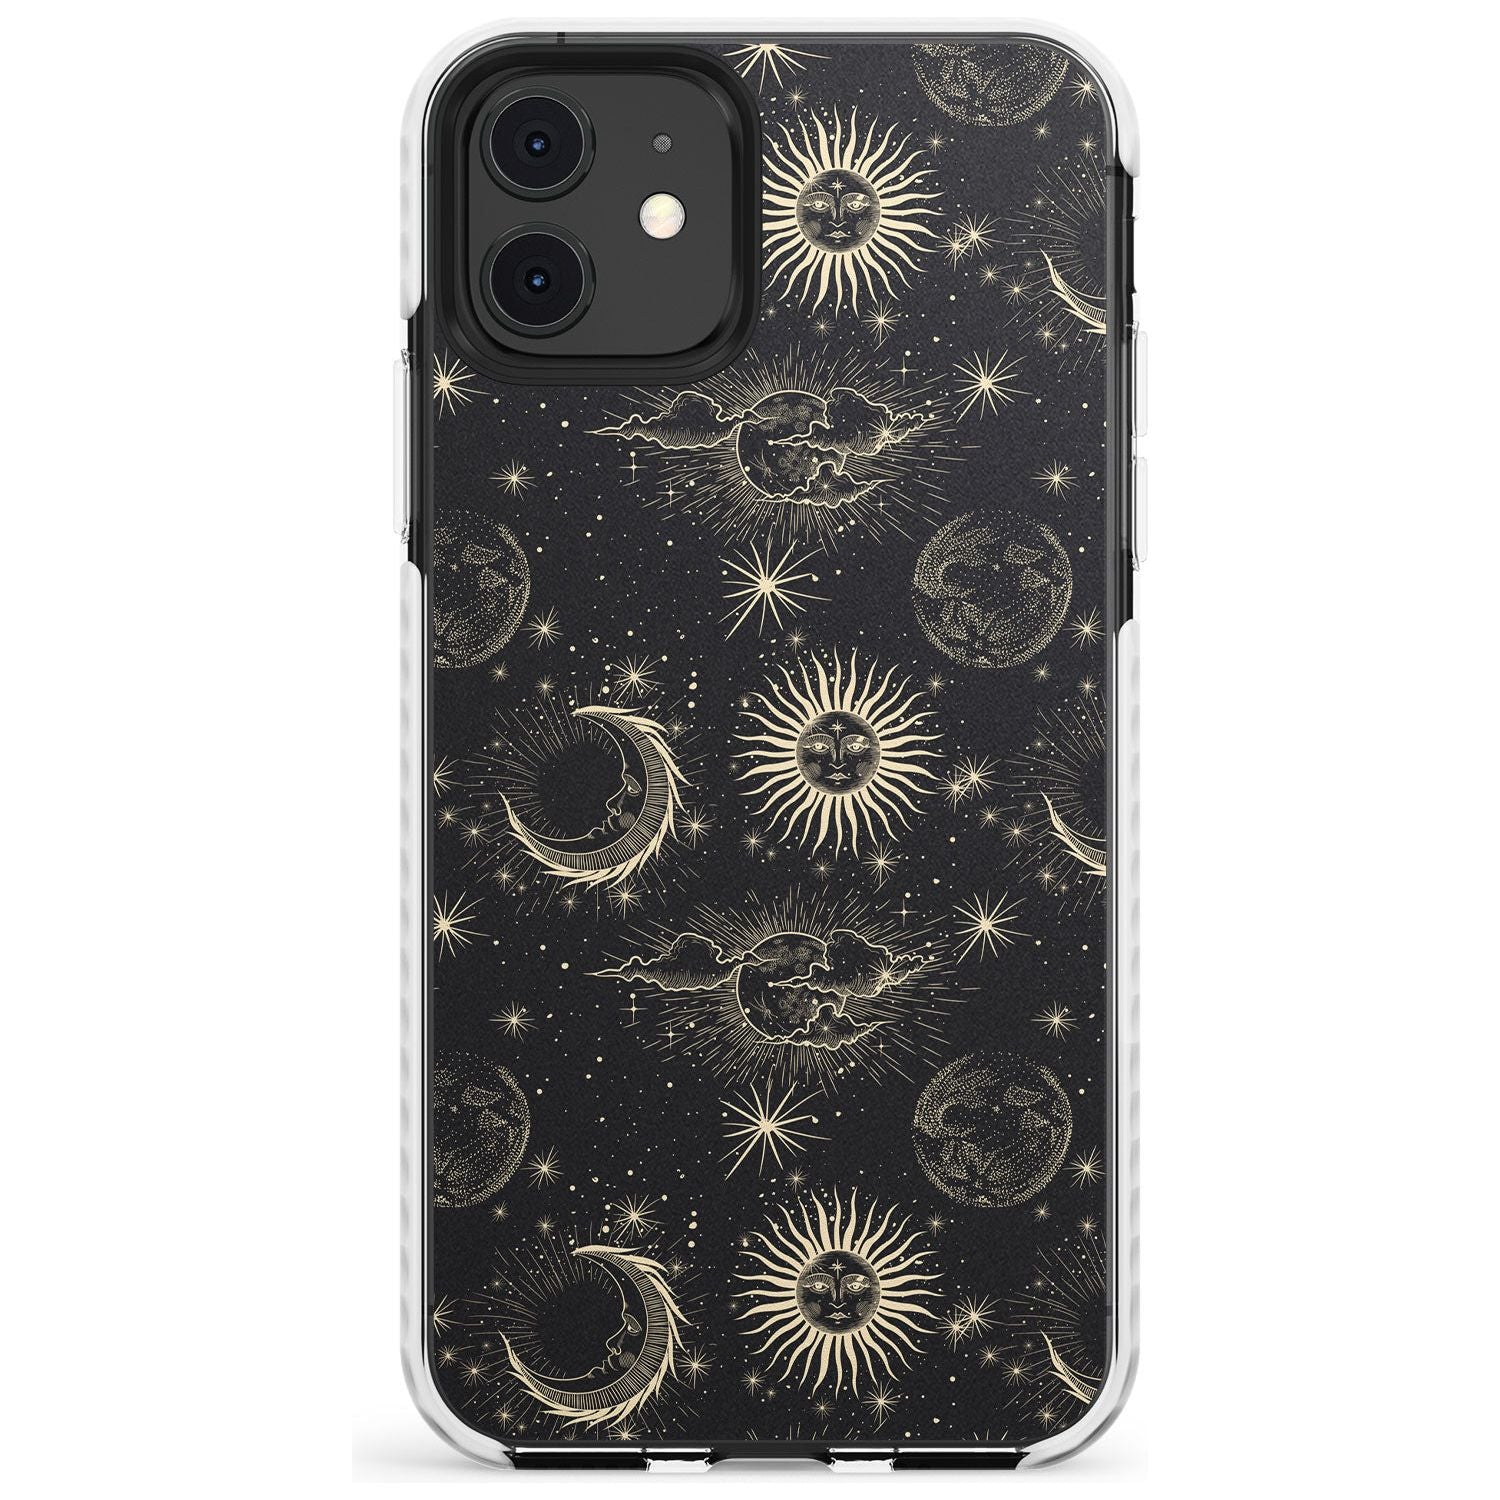 Large Suns, Moons & Clouds Slim TPU Phone Case for iPhone 11